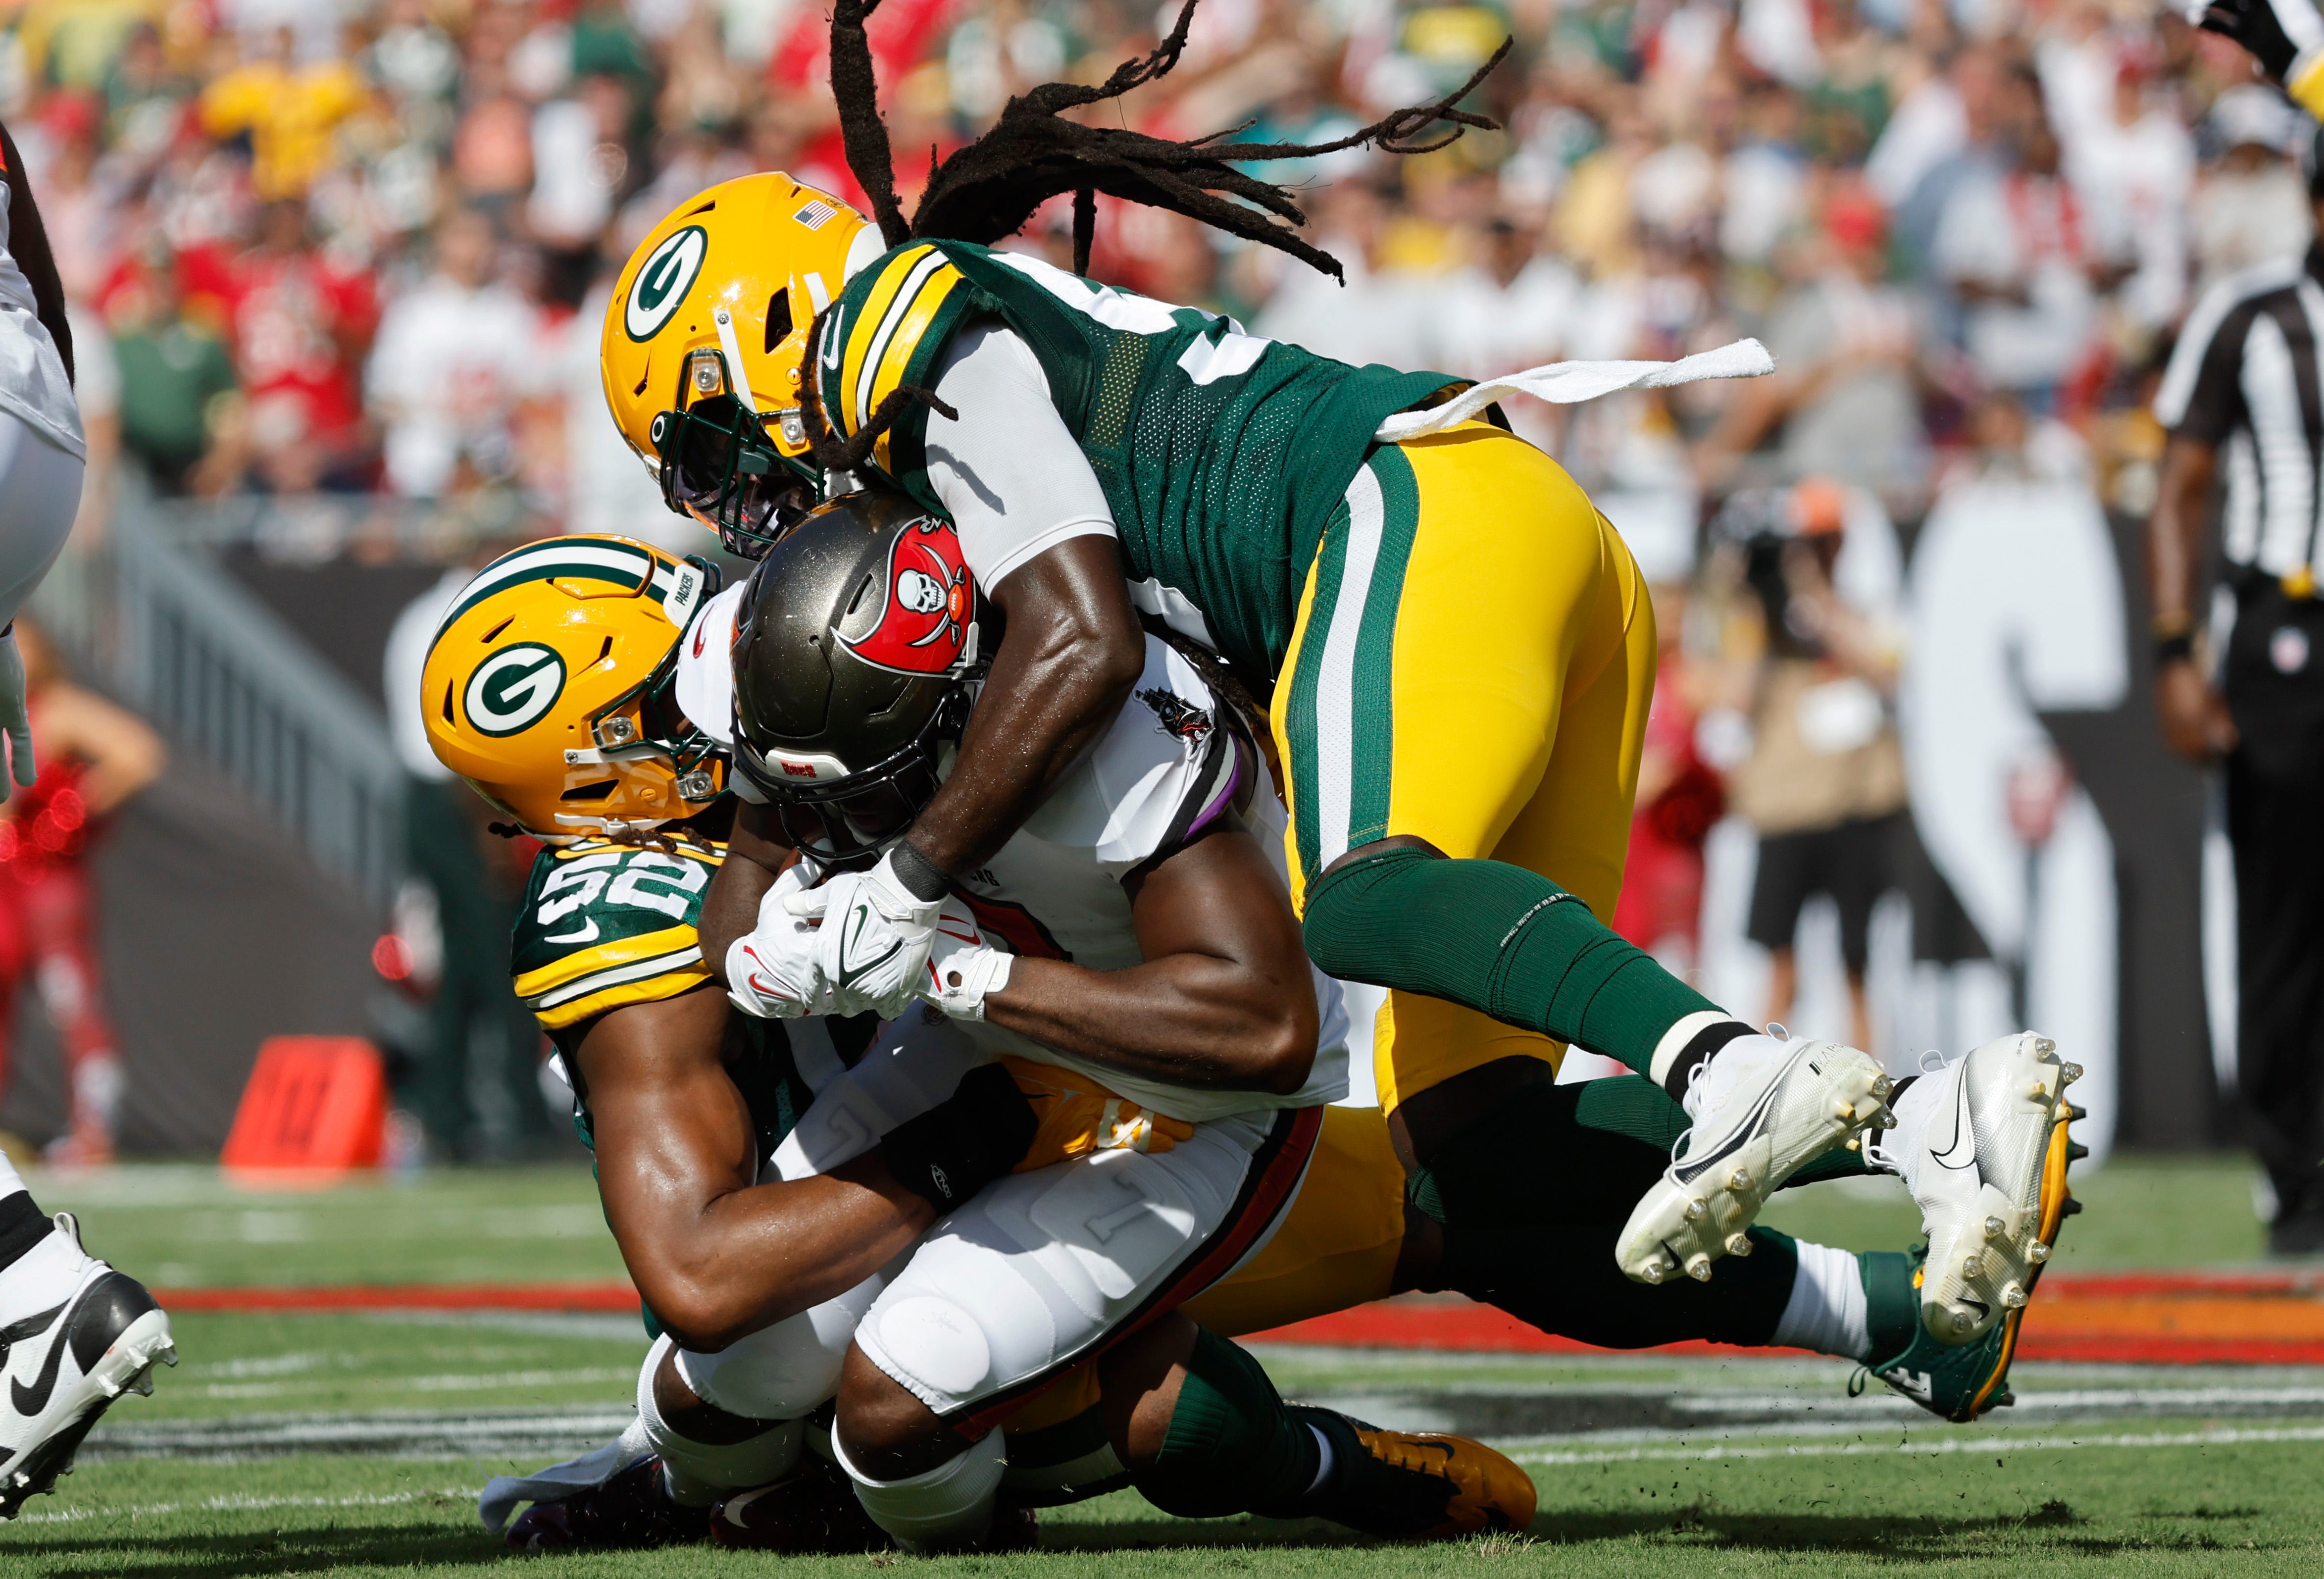 Tampa Bay Buccaneers running back Leonard Fournette (7) is brought down by Green Bay Packers linebacker De'Vondre Campbell (59) and linebacker Rashan Gary (52) during the first quarter on Sept. 25, 2022, at Raymond James Stadium in Tampa, Florida.